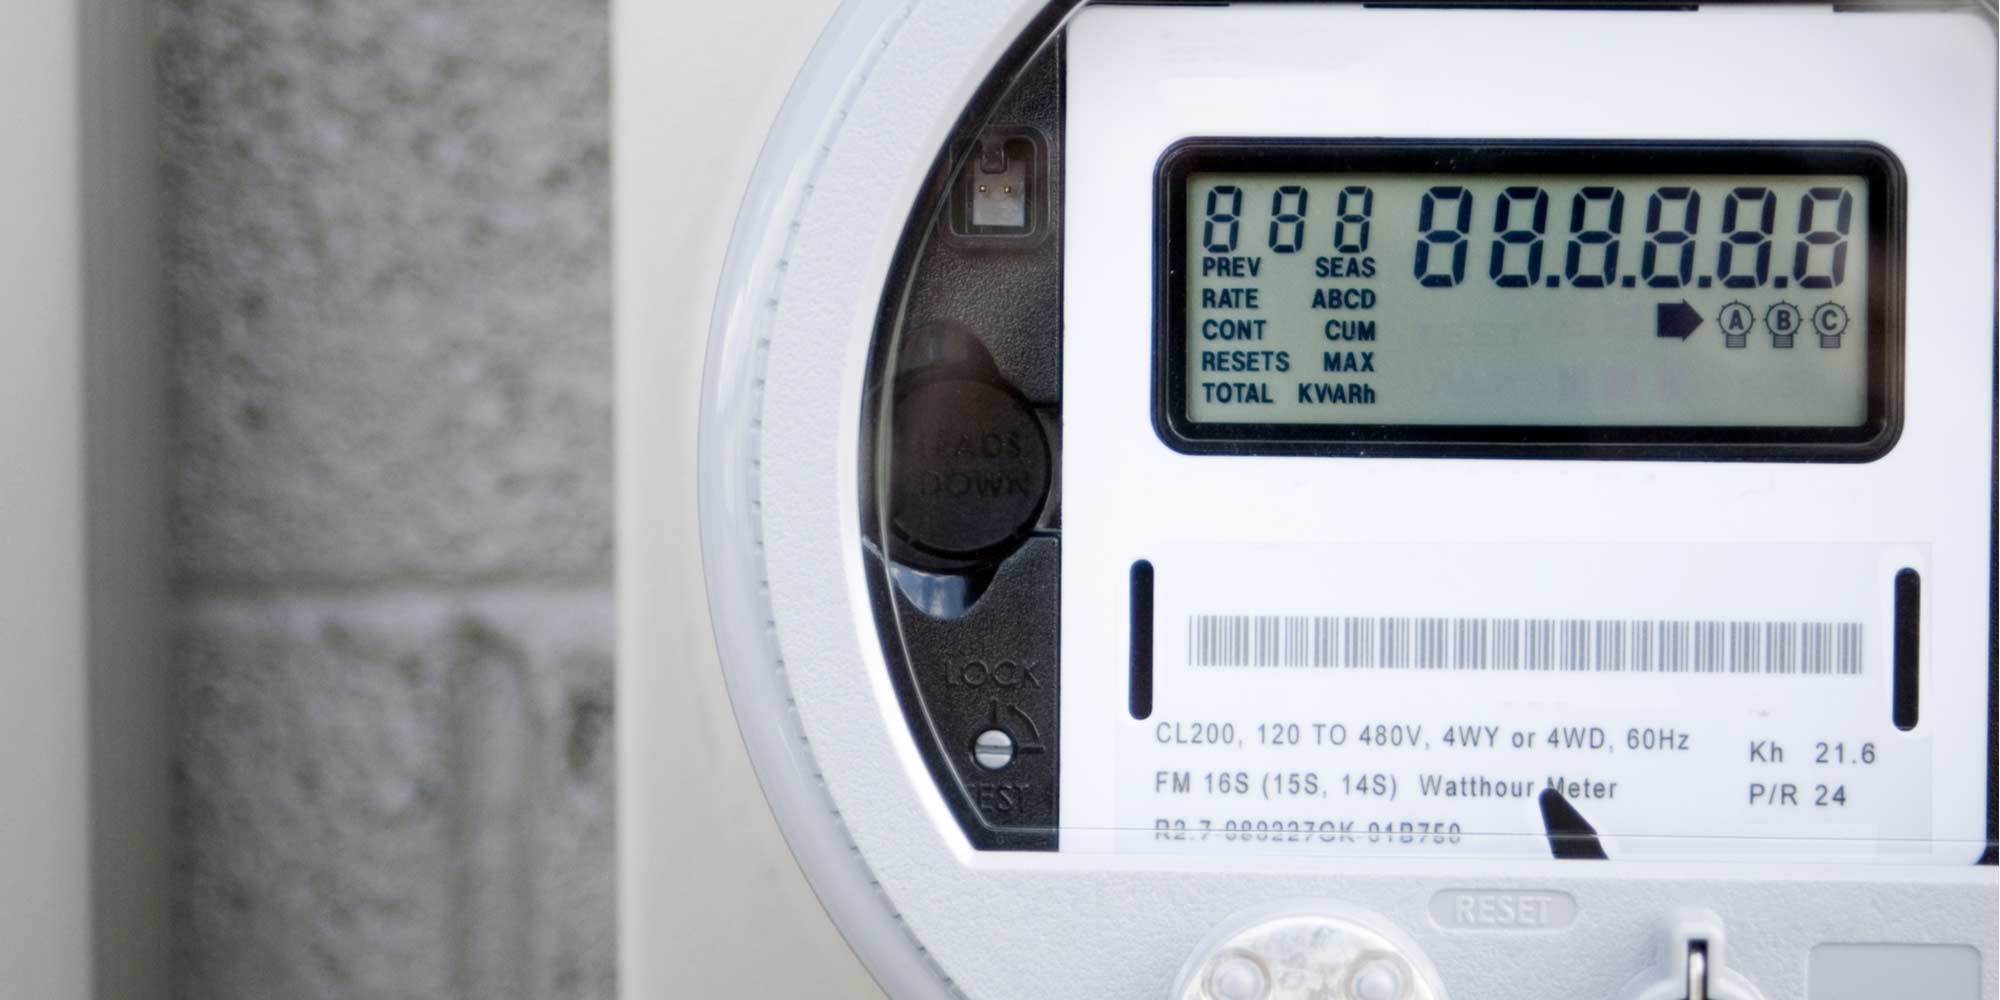 Case study - Smart meter systems